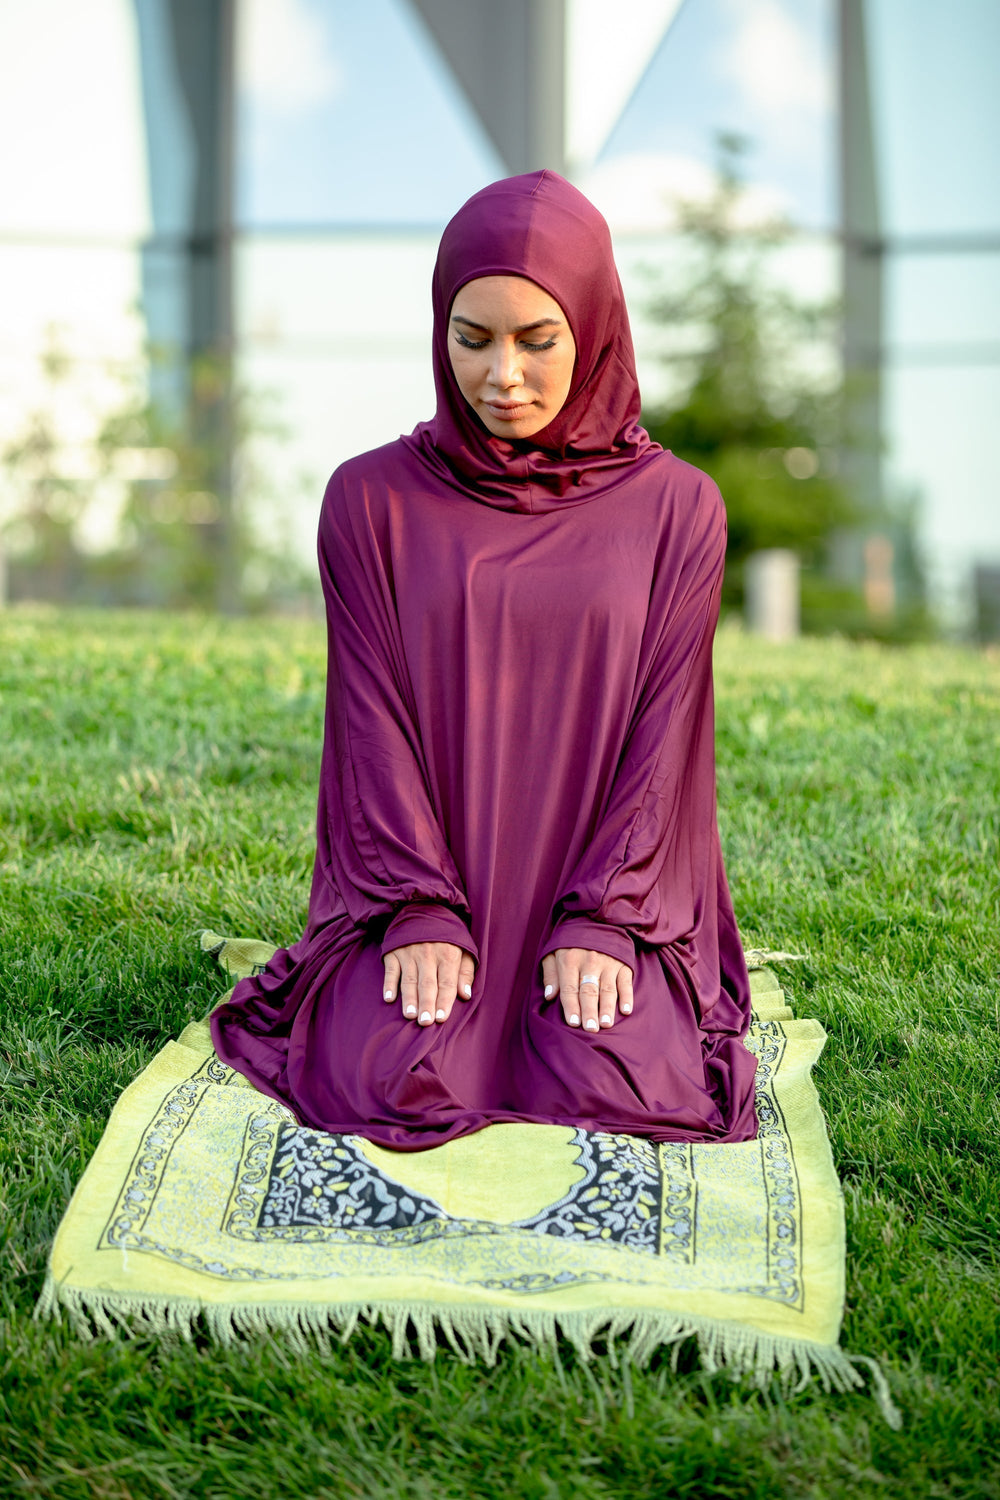 Urban Modesty - One Piece Salah Prayer Outfit (More colors available)